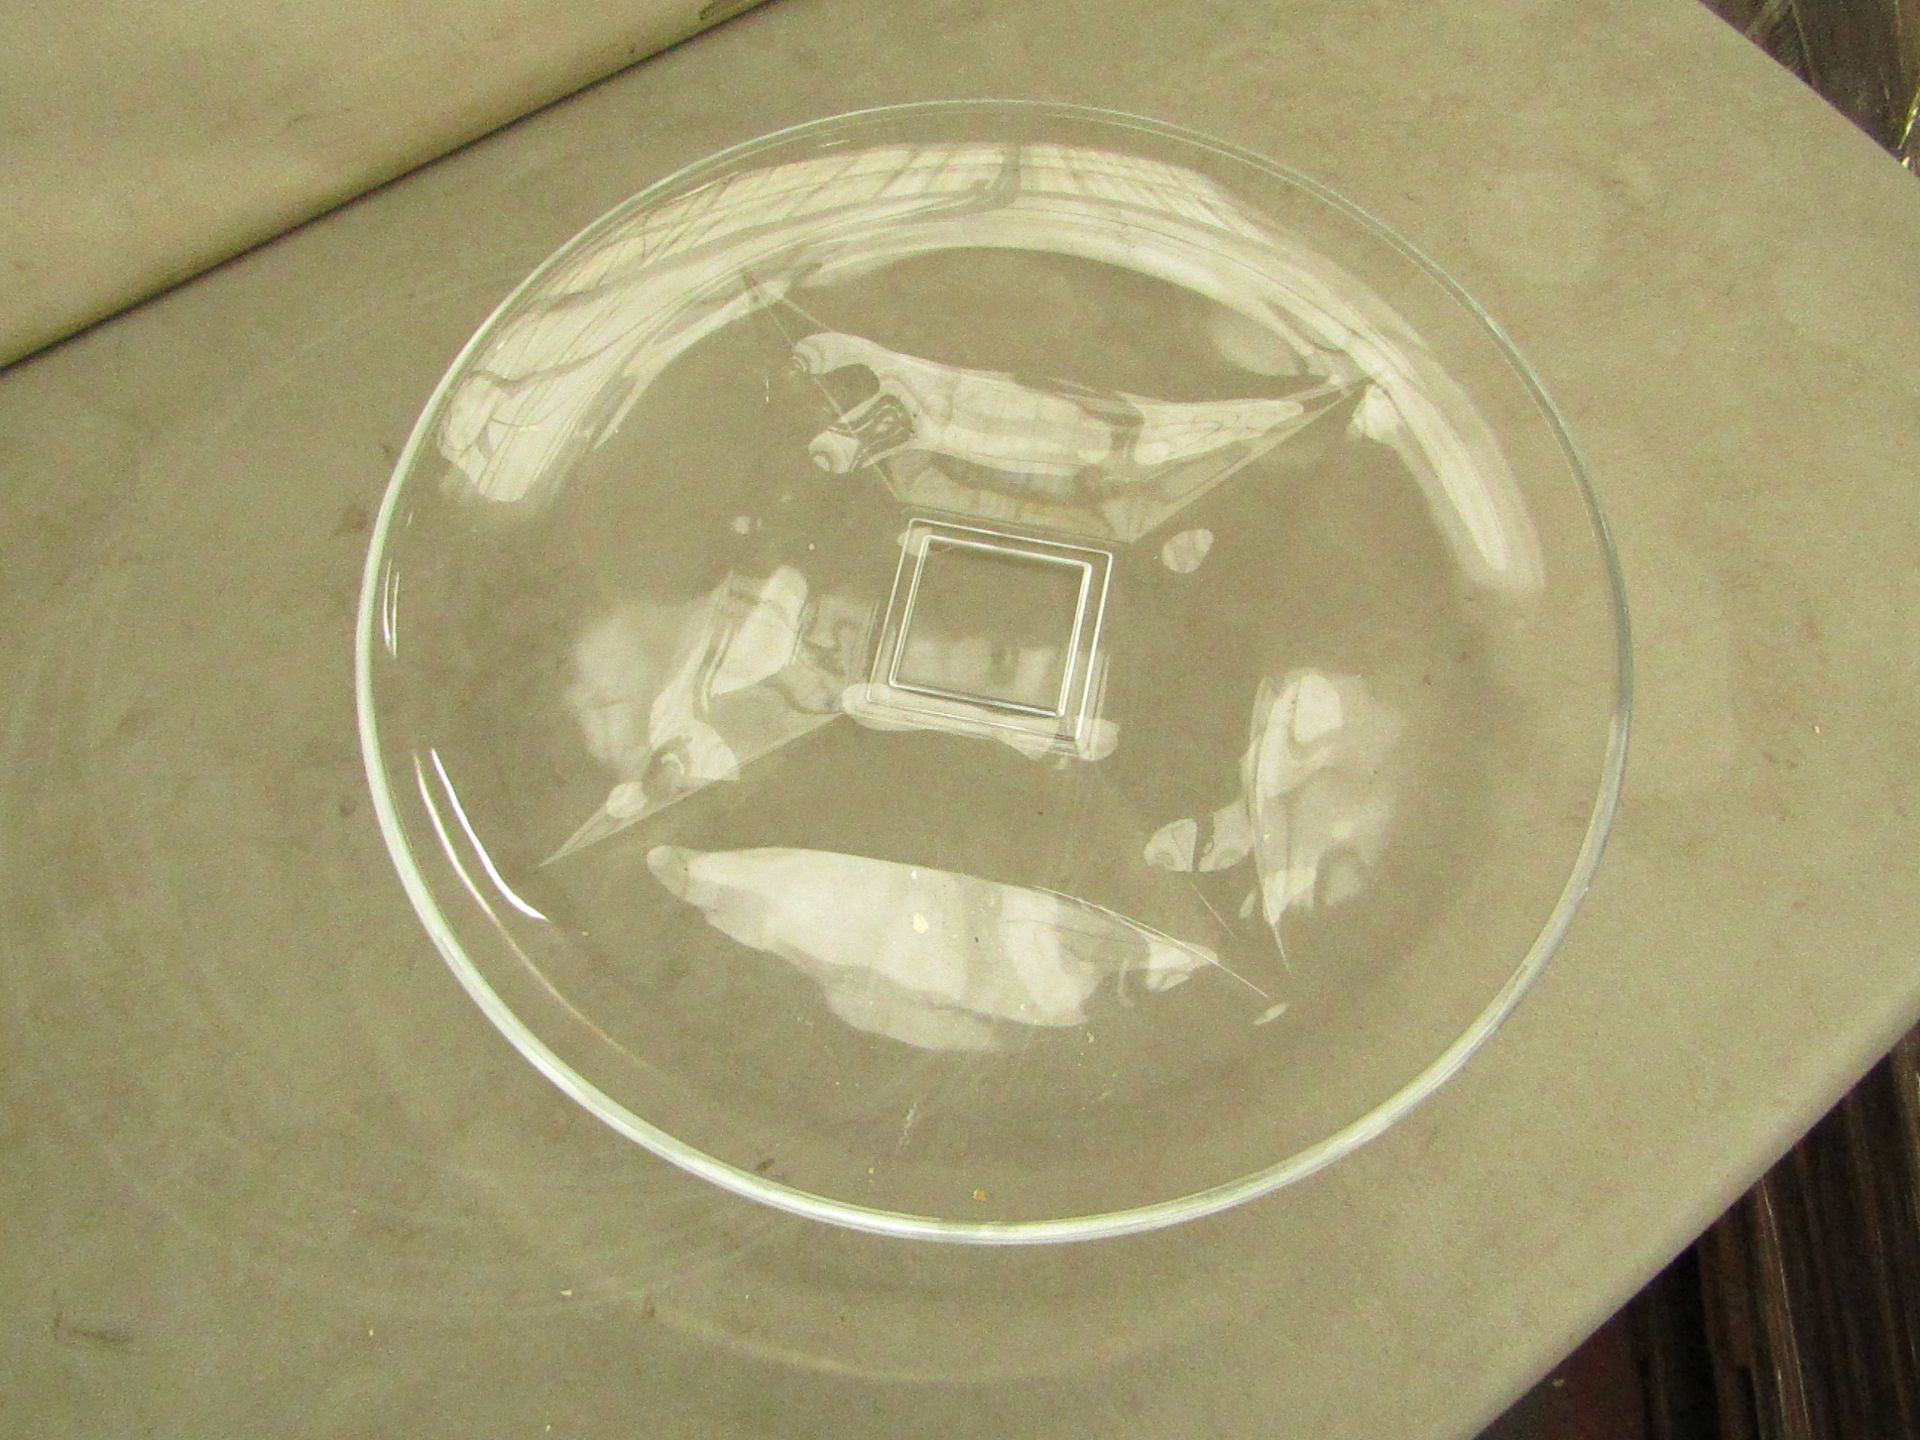 2x Large Glass Plate - New, Good Condition.